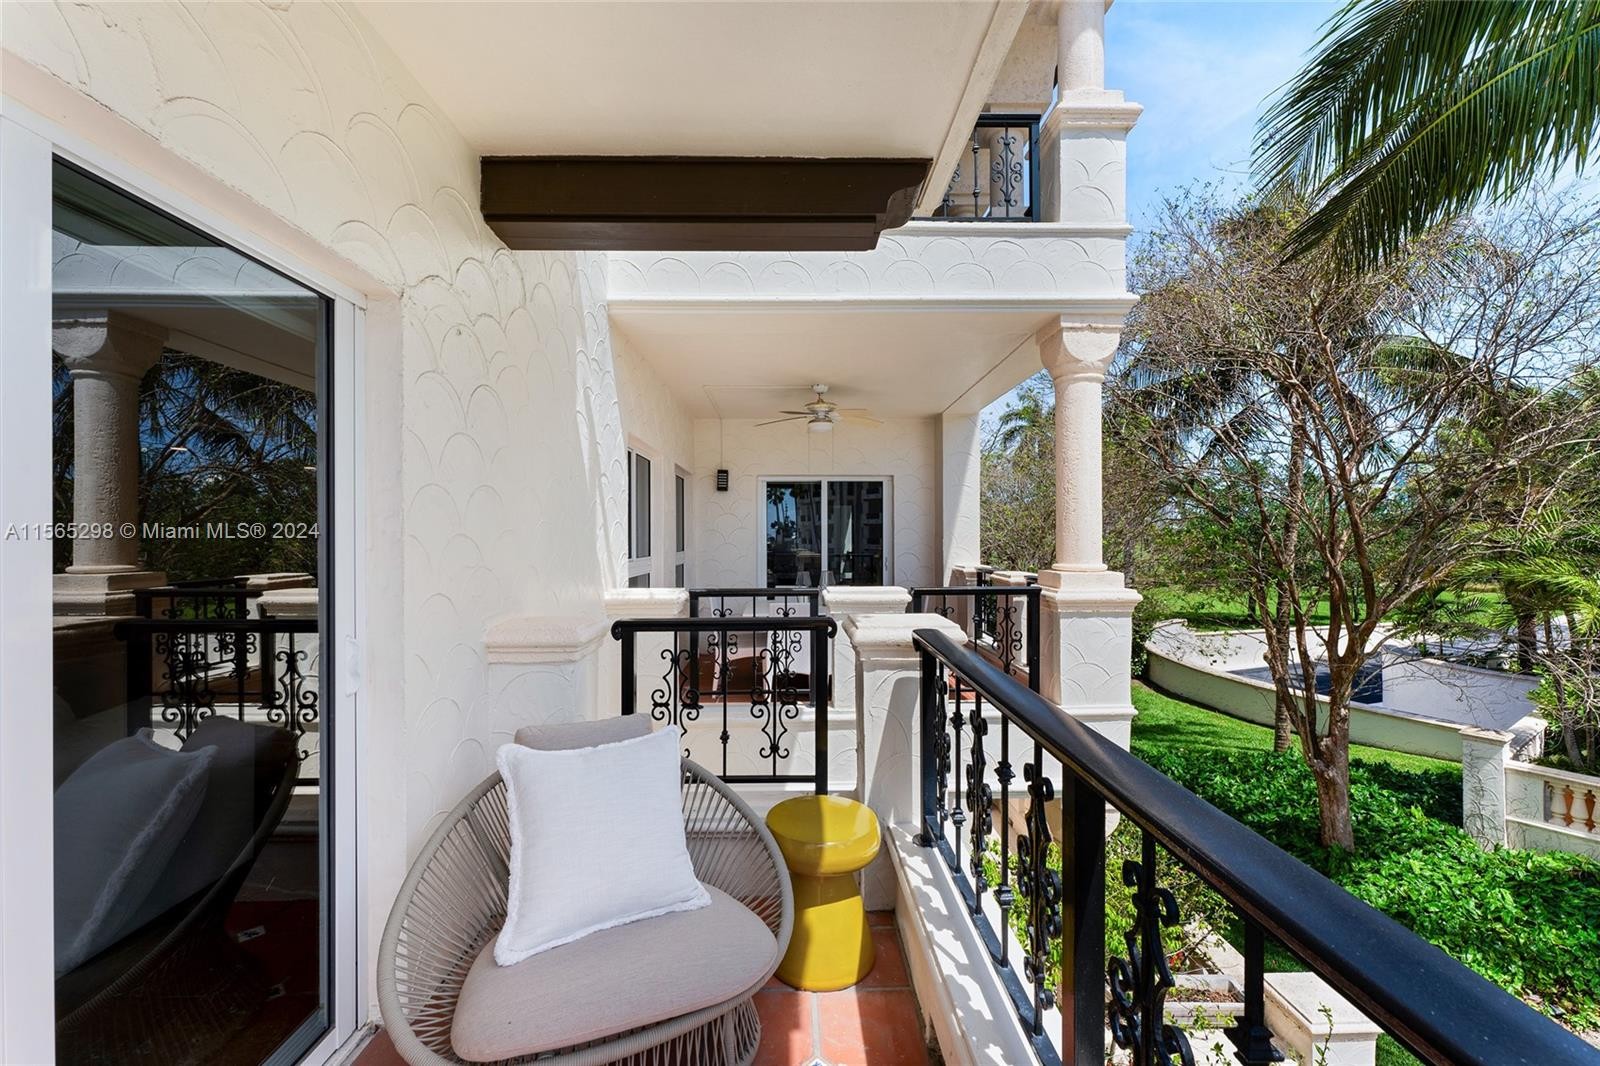 21. 2221 Fisher Island Dr